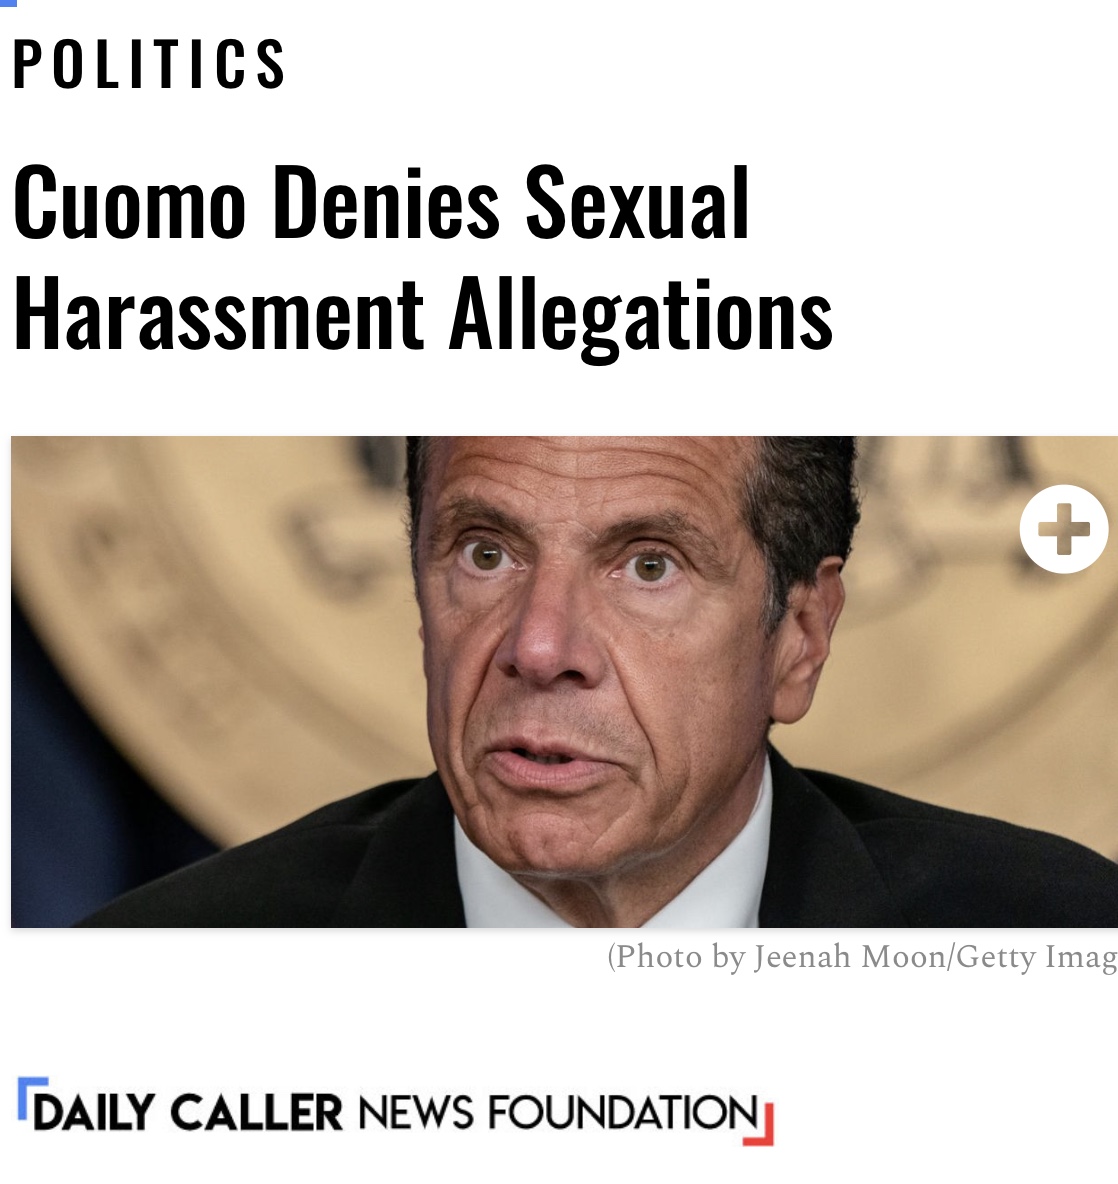 Breaking News Cuomo Denies Sexual Harassment Allegations